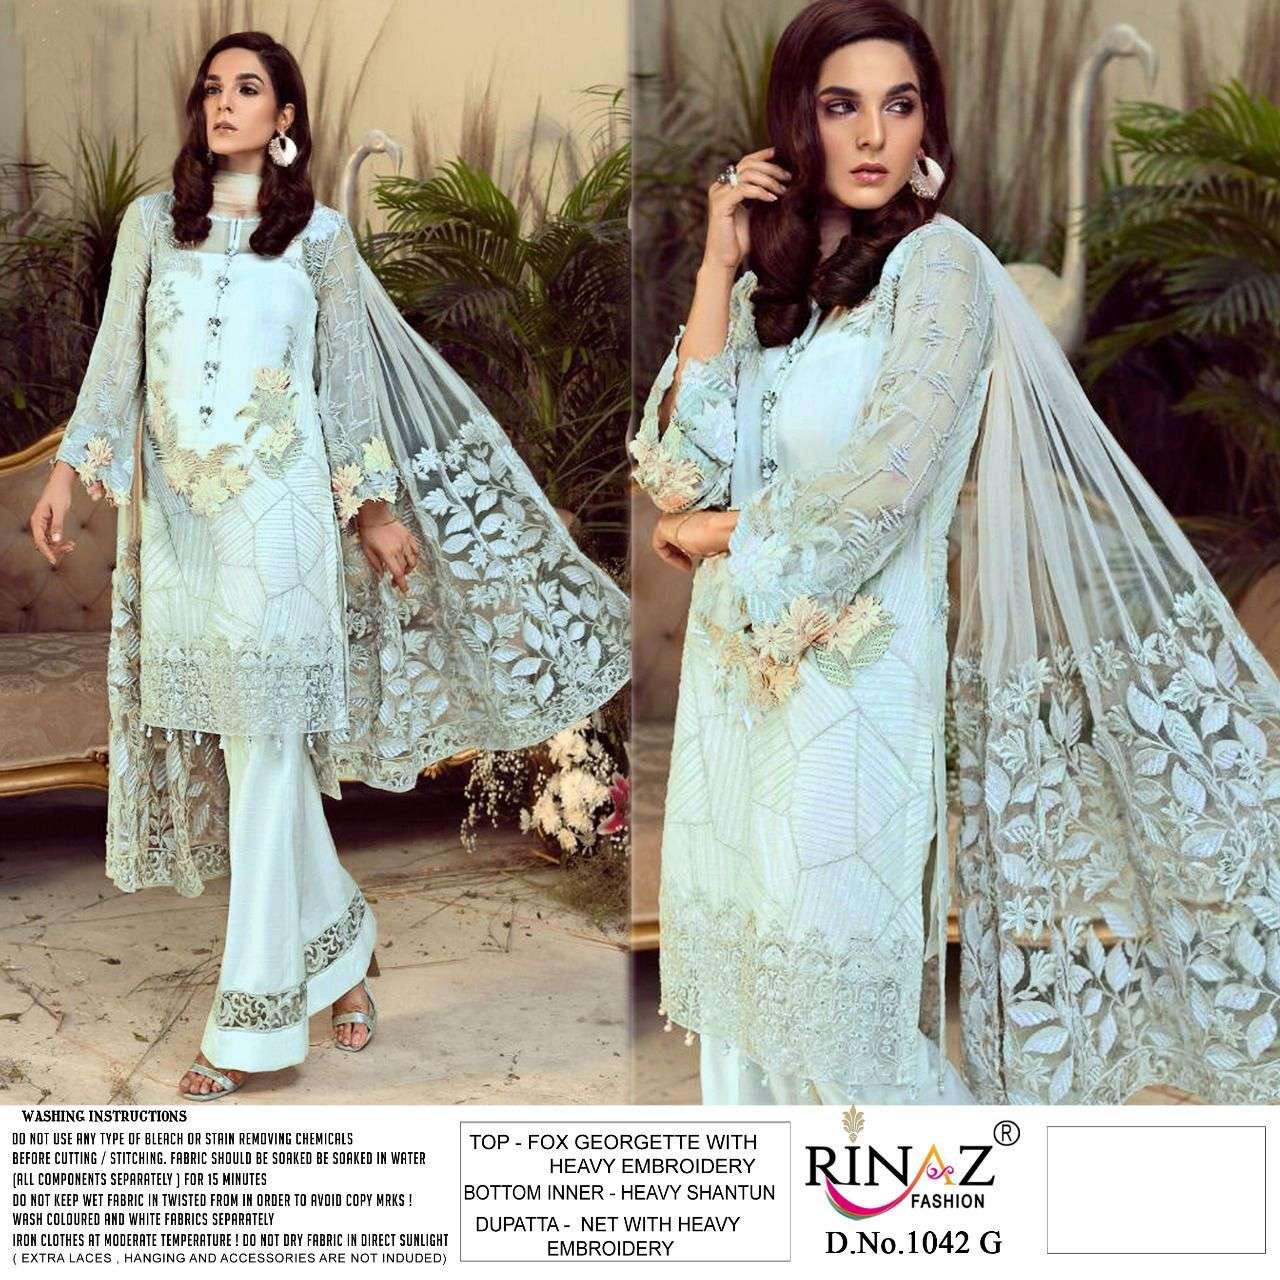 Surya Trending Net/Lace Embroidered Multi-purpose Fabric Price in